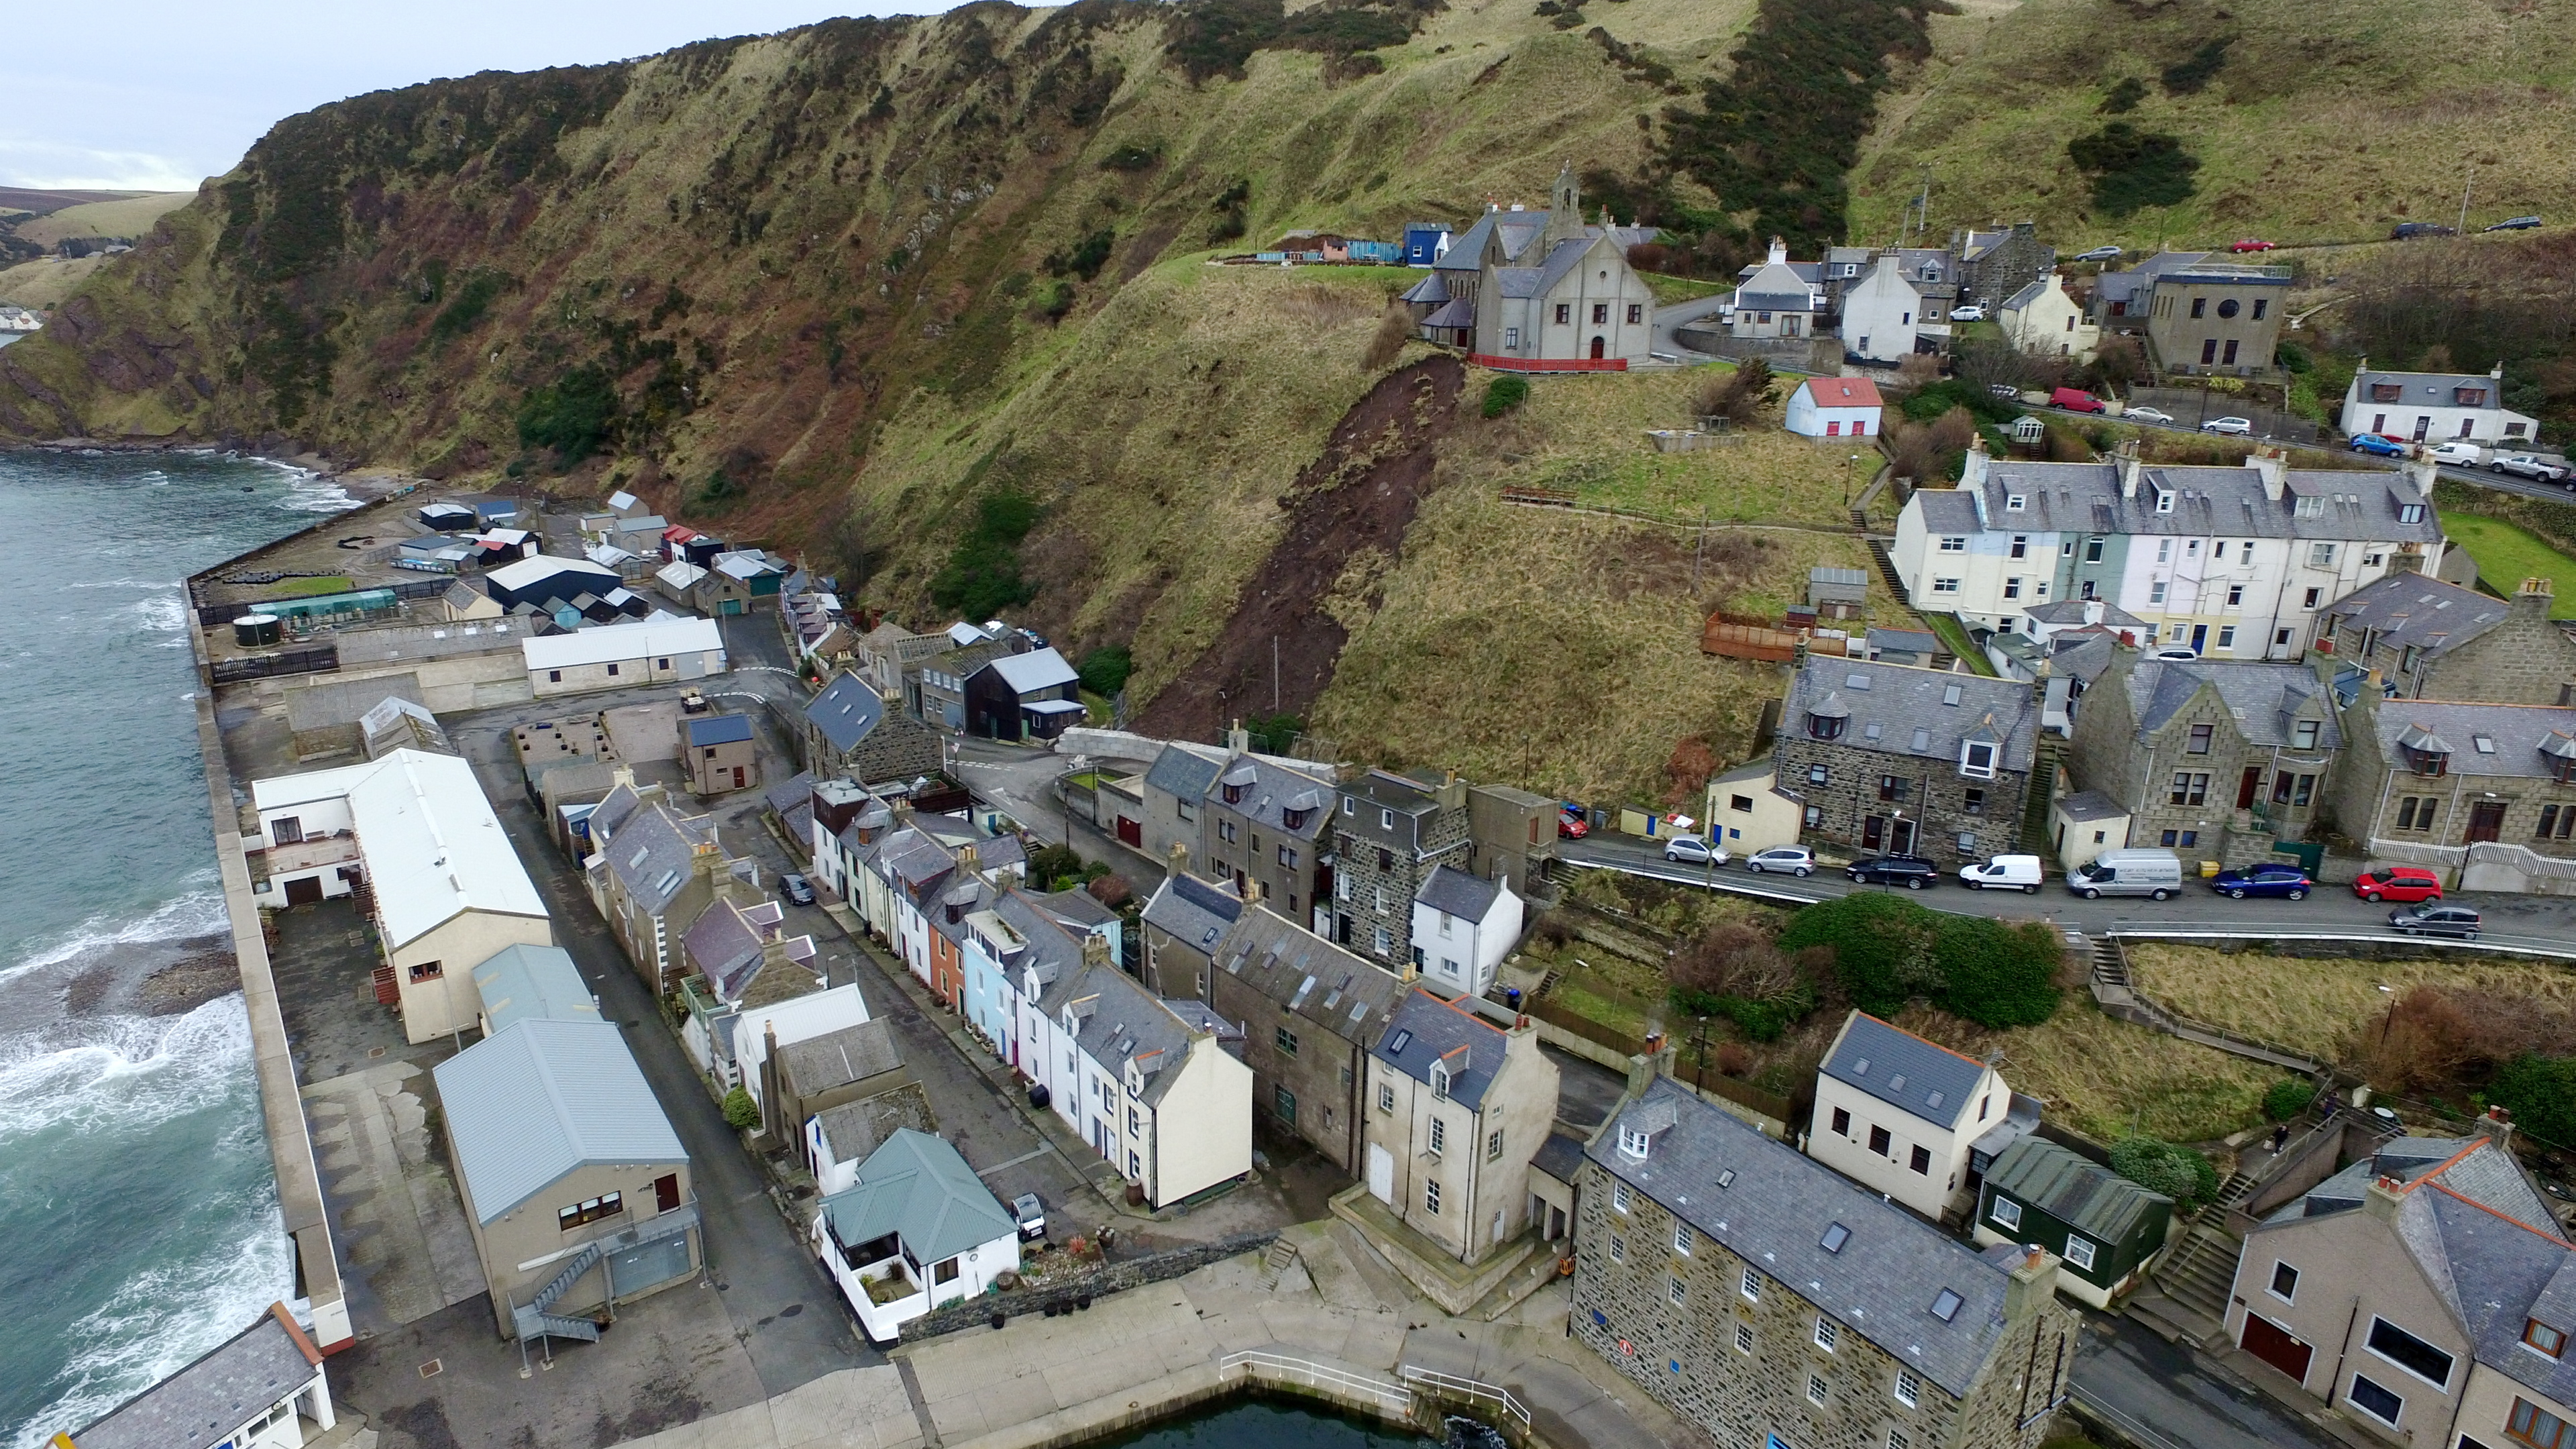 Gardenstown New Church and Harbour Road in Gardenstown have frequently closed following landslips.
Picture by Kenny Elrick